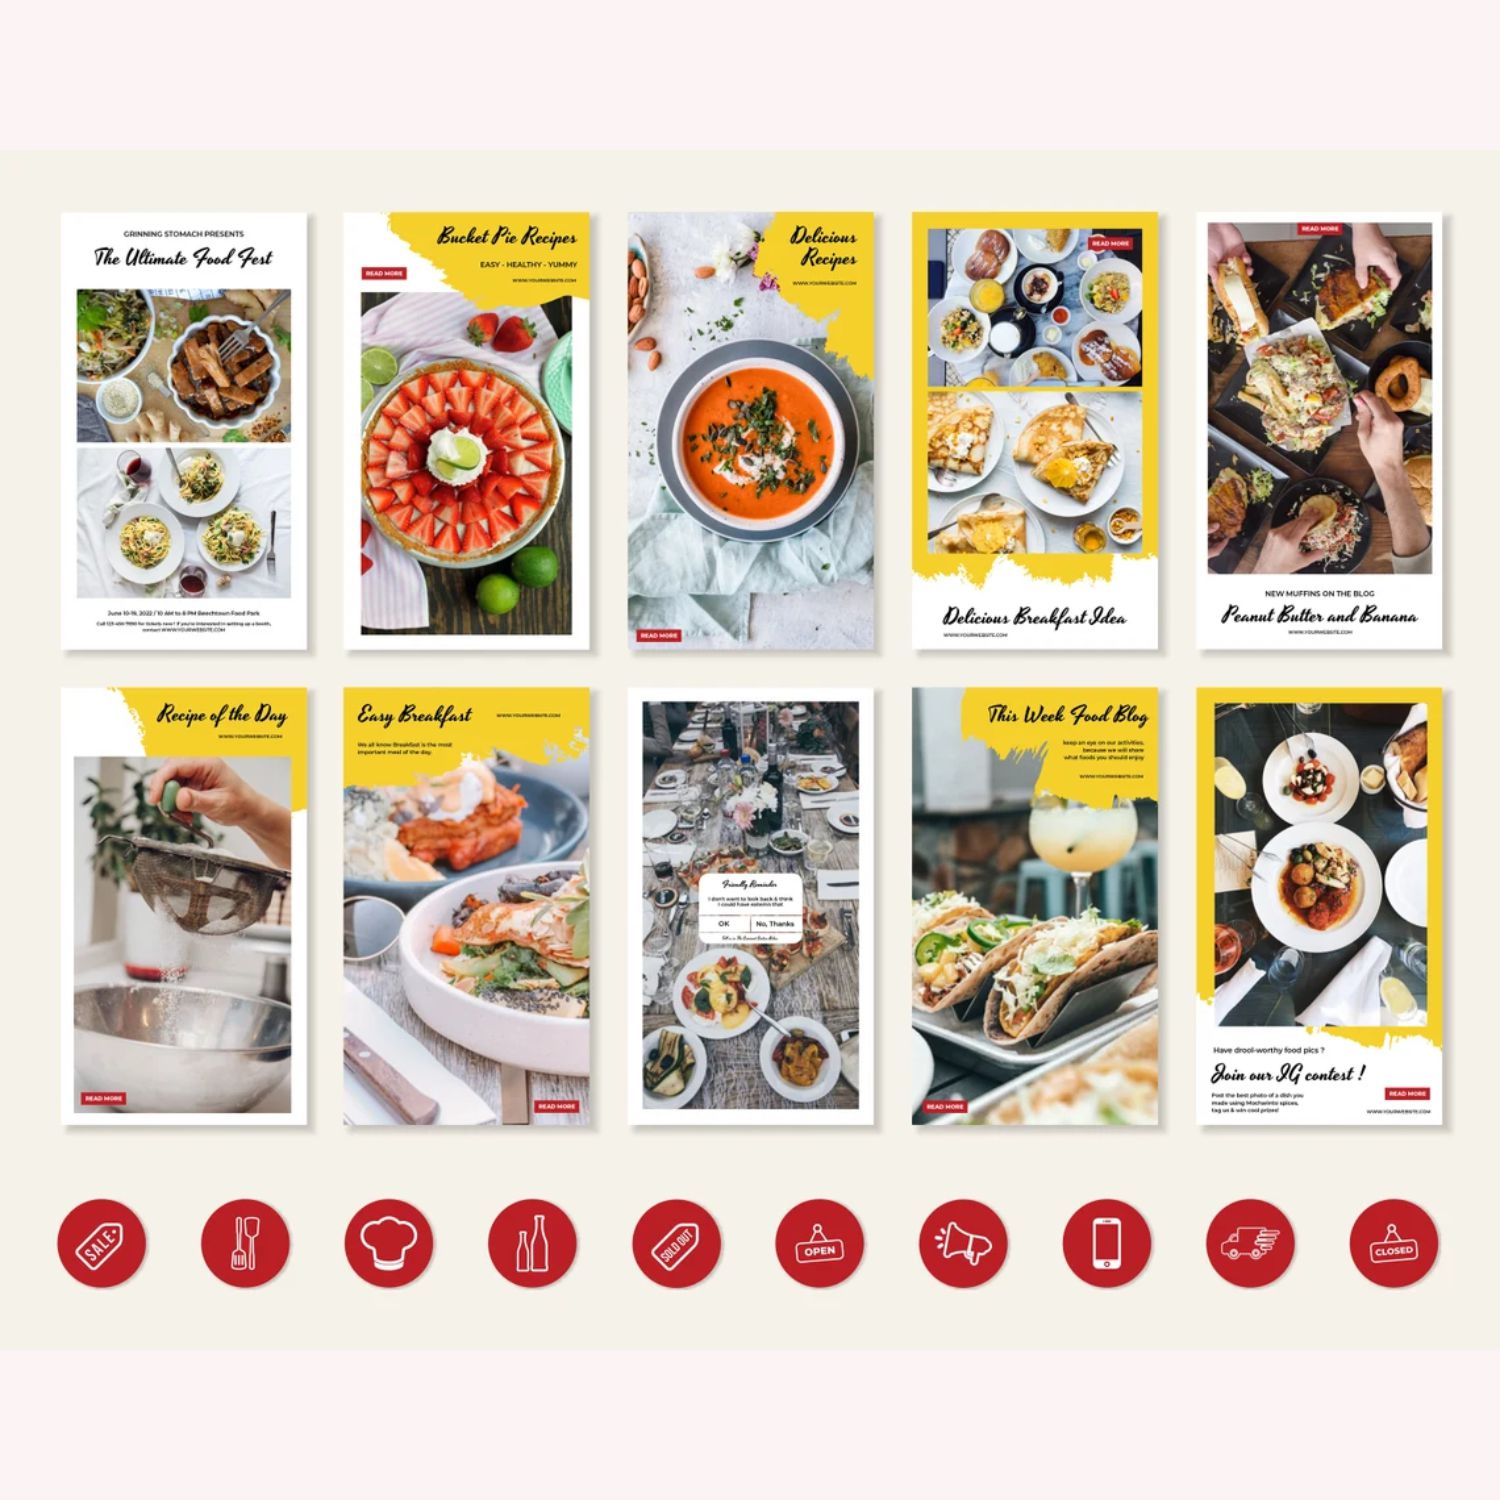 Restaurant Food Blogger Story And Icon Social Media Template Examples.